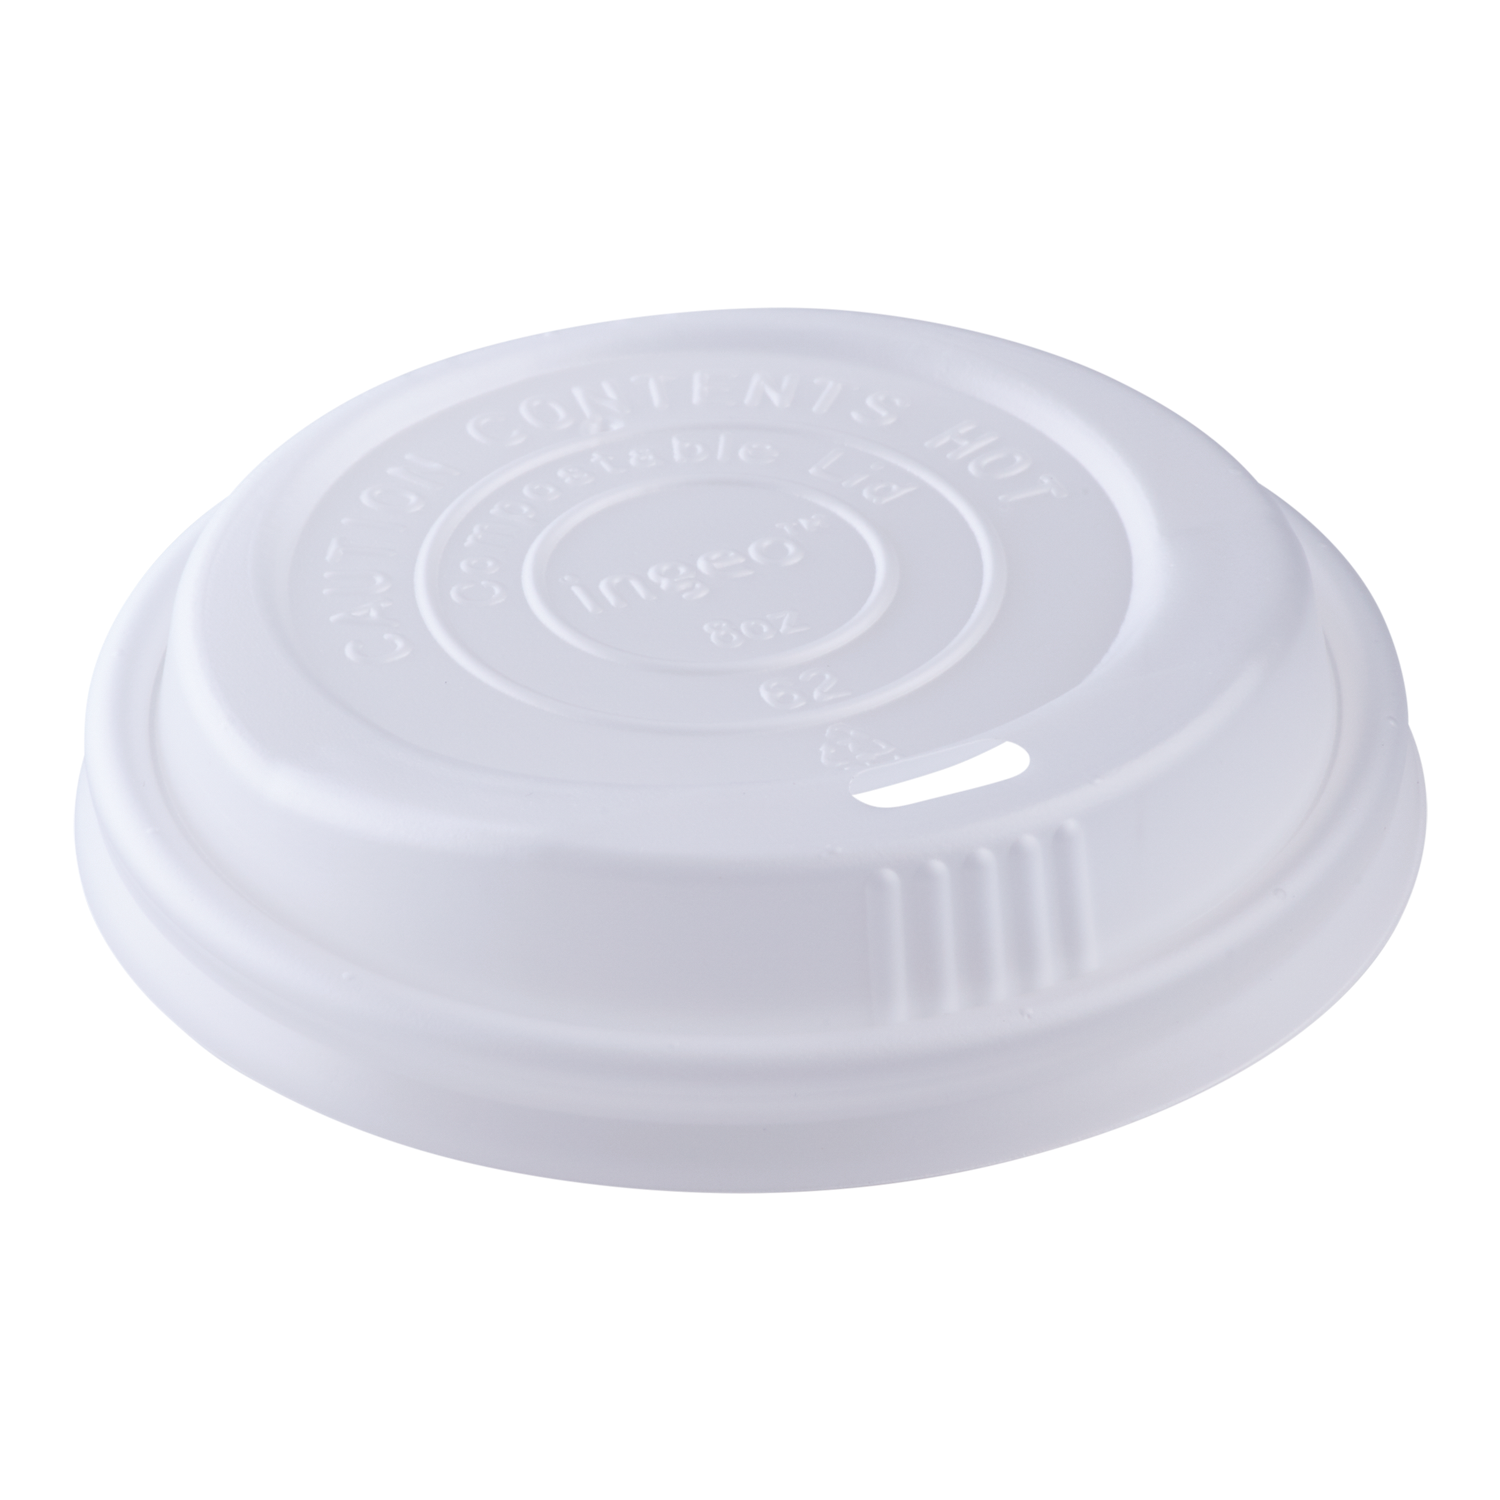 COMPOSTABLE SIPPER DOME LID
FOR 8 OZ ECO HOT CUP 1,000/CS